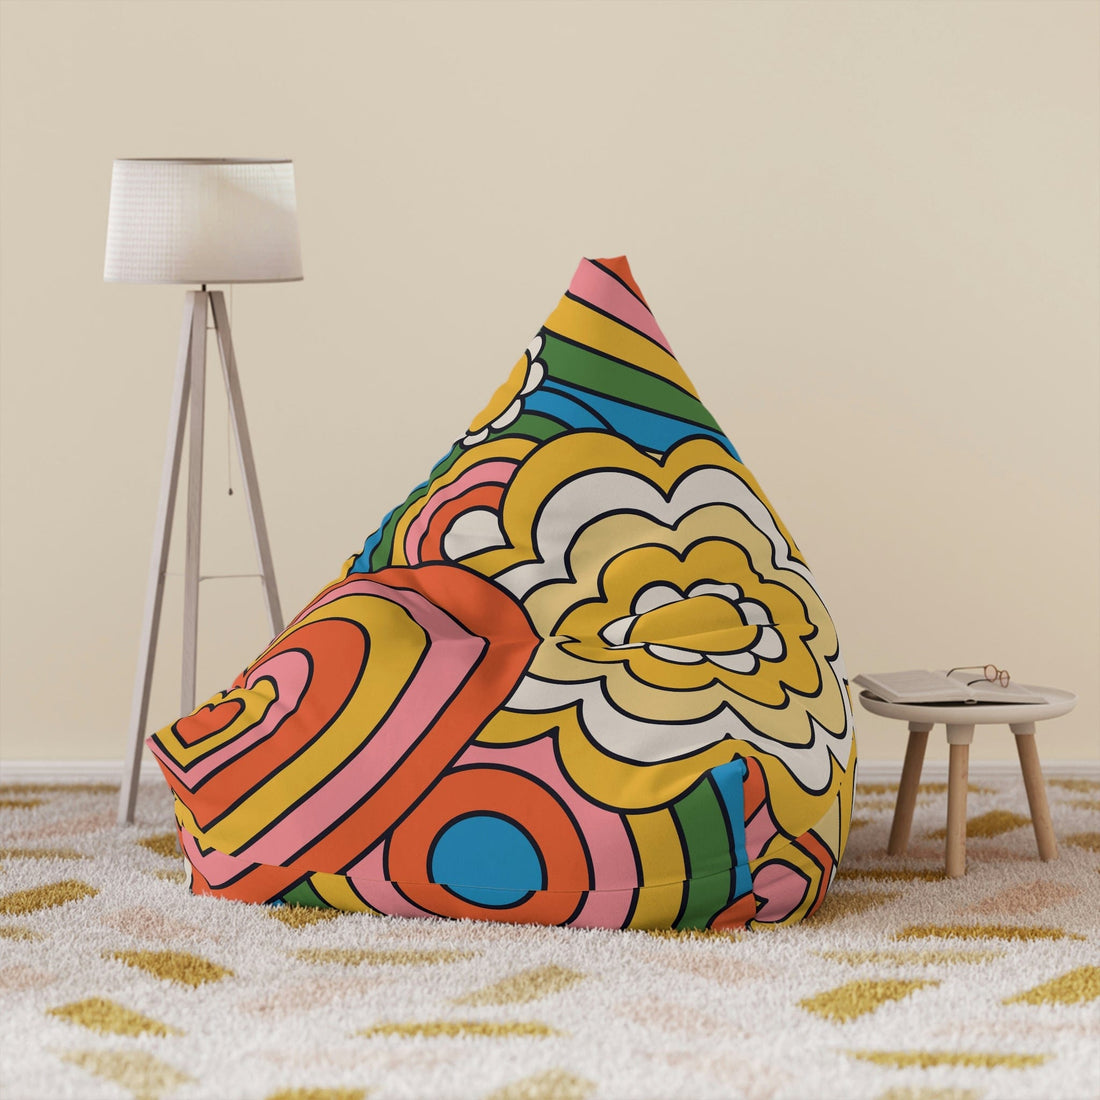 Kate McEnroe New York Retro 70s Psychedelic Hearts and Daisy Flowers Bean Bag Chair CoverBean Bag Chair Covers13616140300572016510